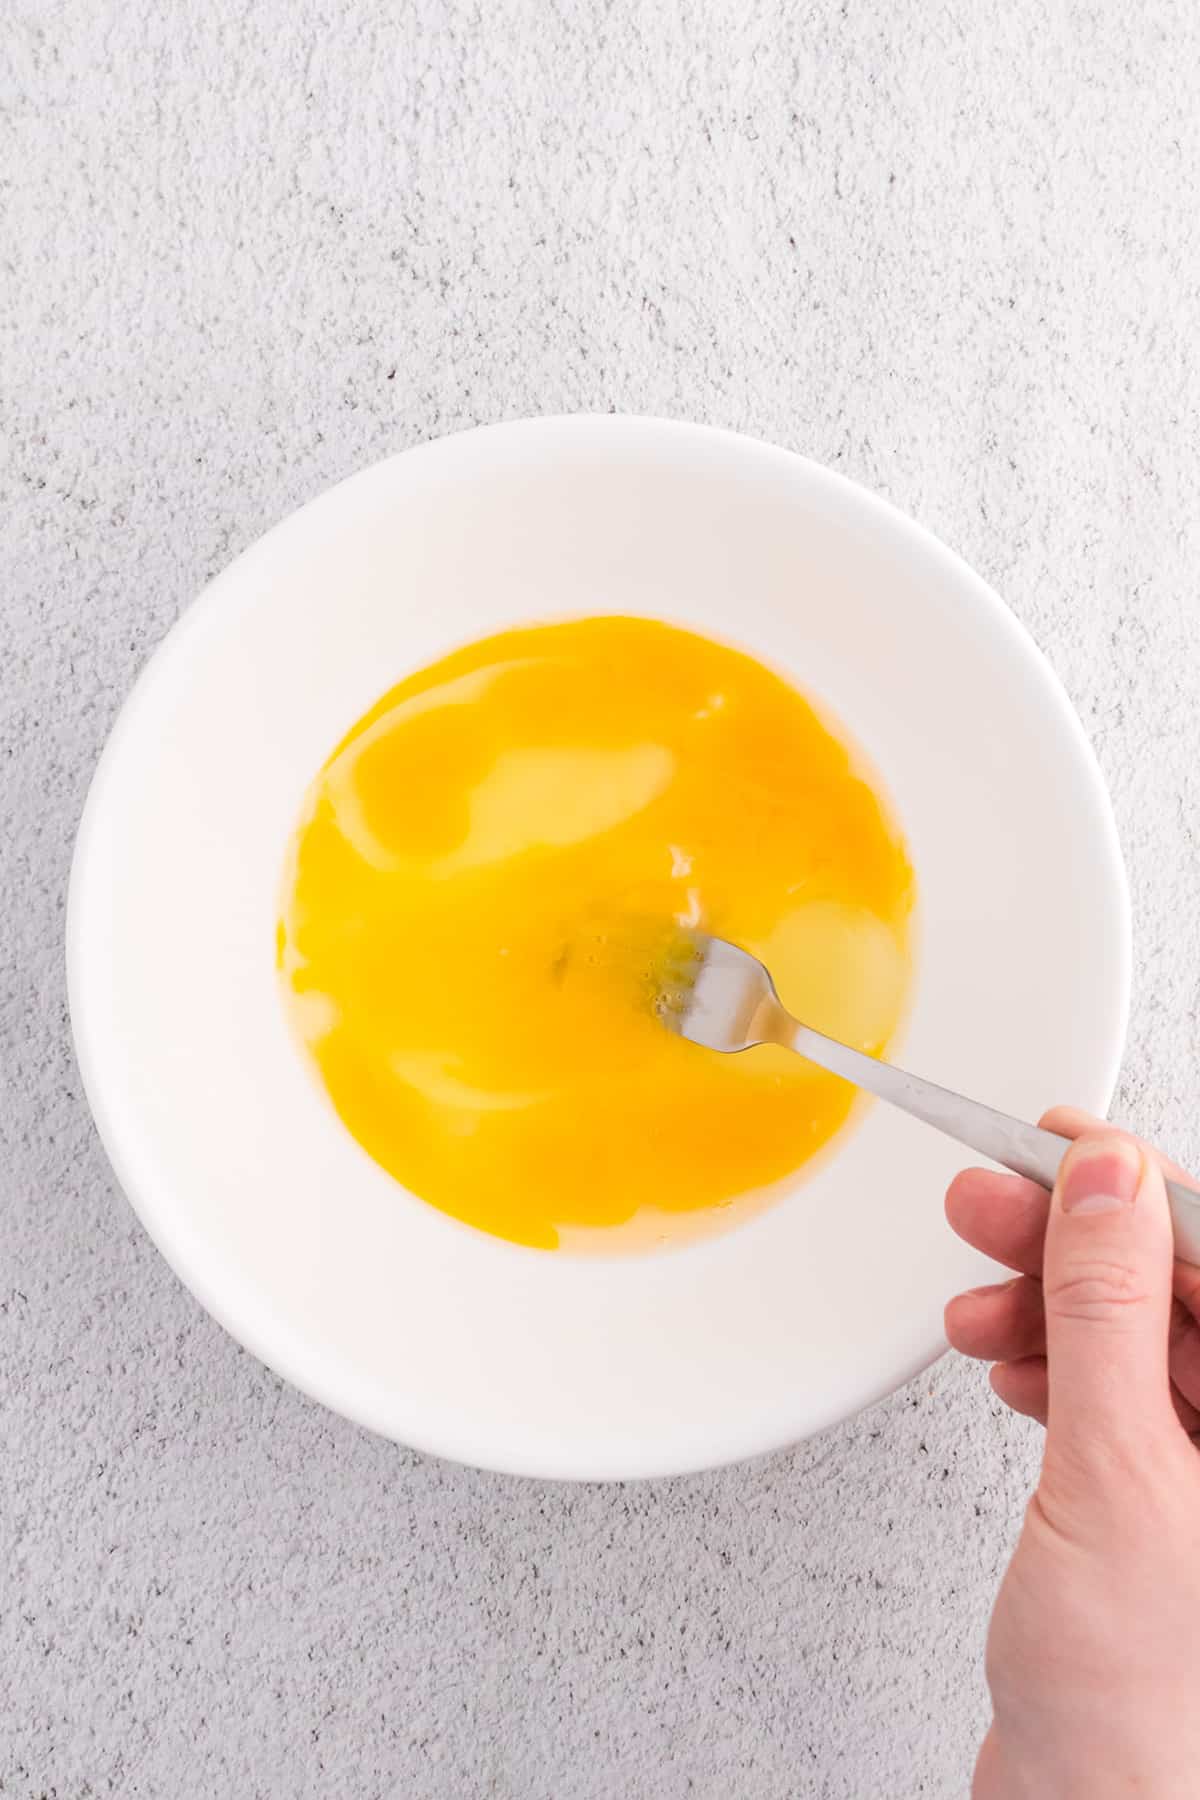 Beating eggs in a bowl.